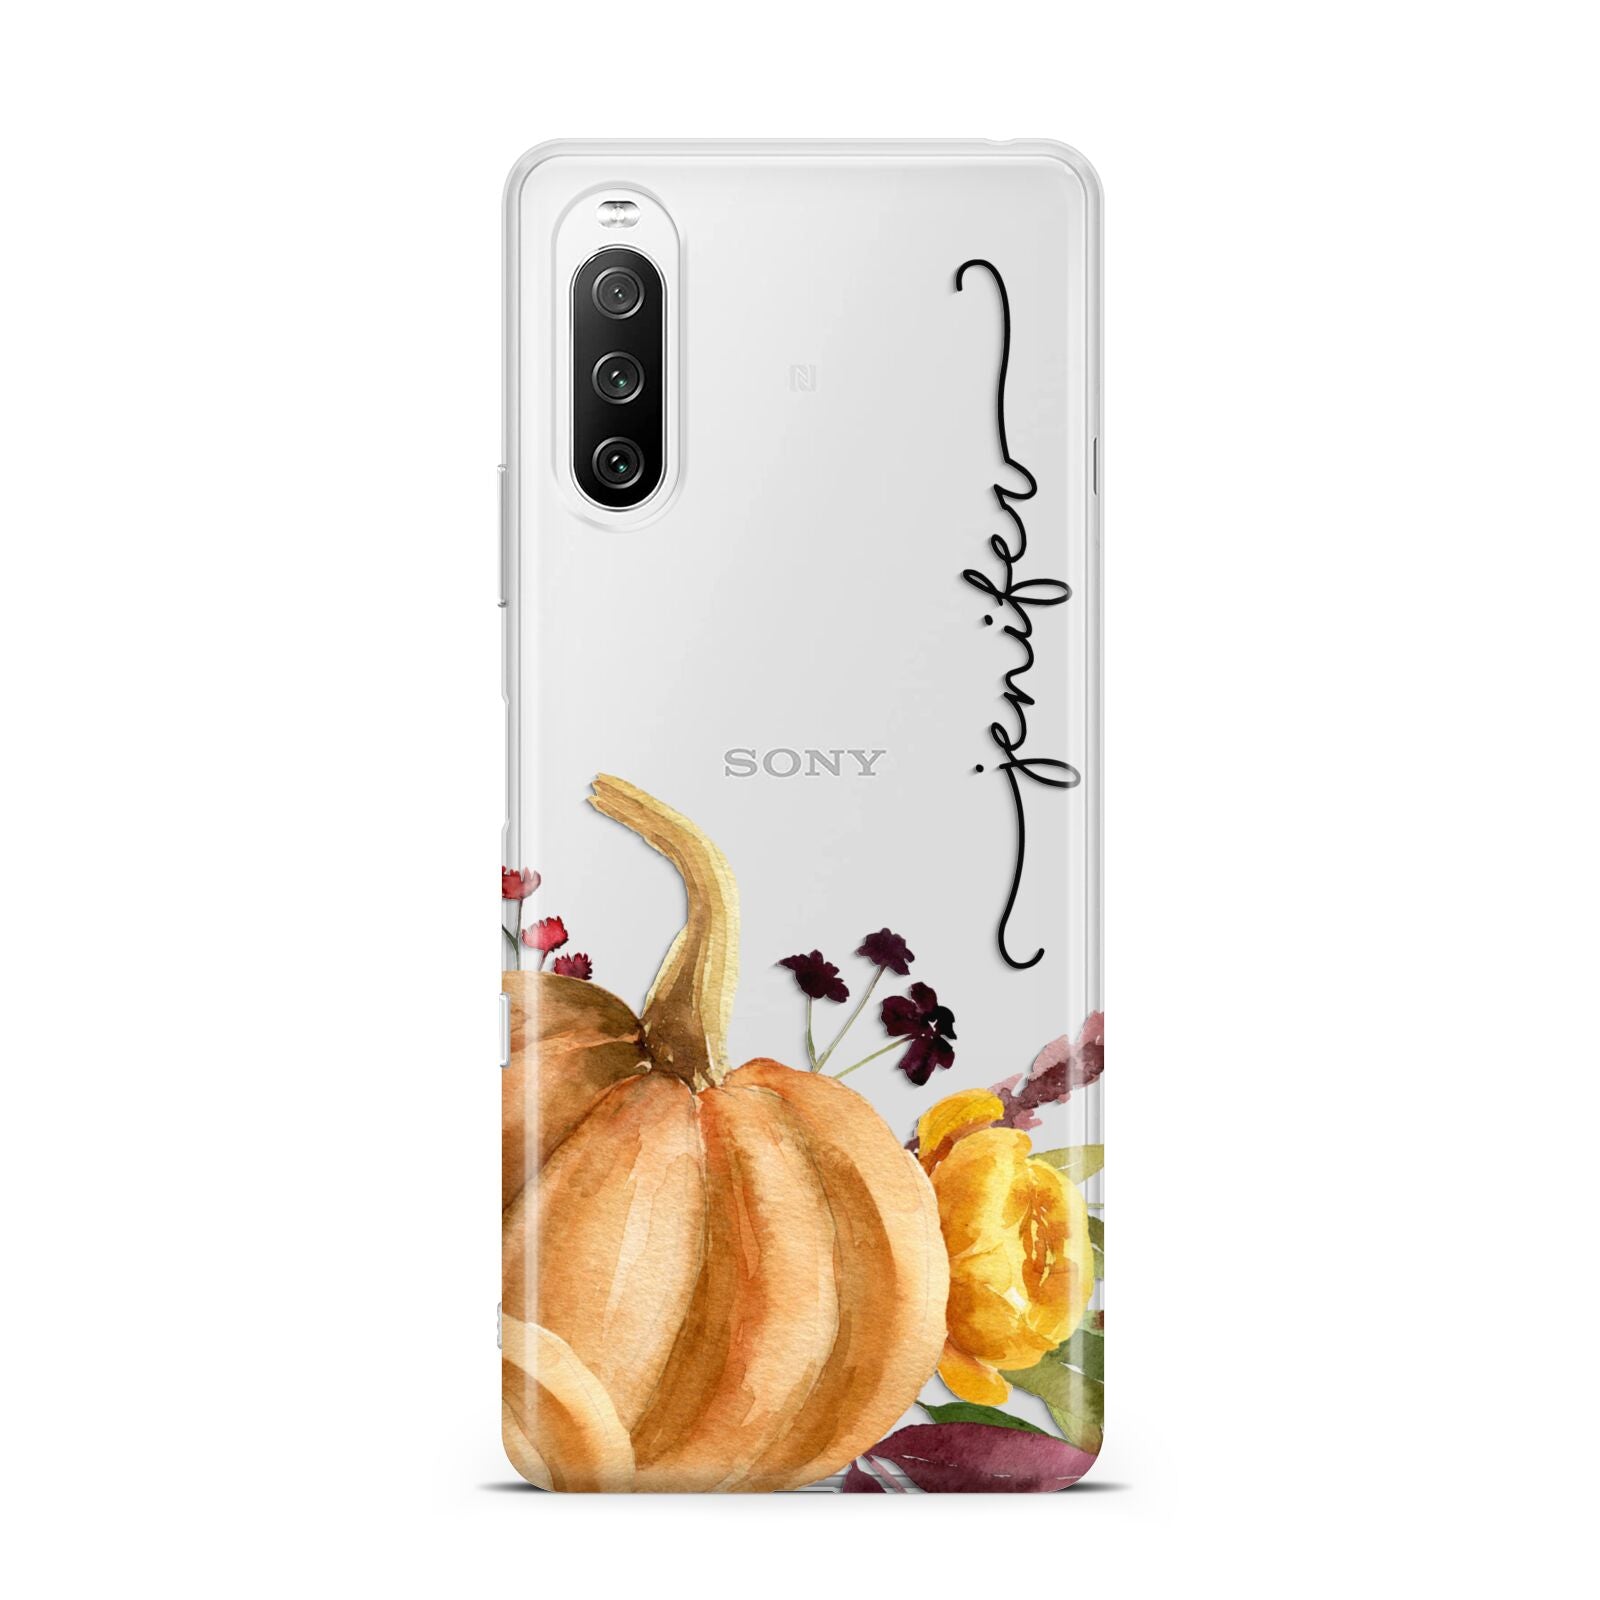 Watercolour Pumpkins with Black Vertical Text Sony Xperia 10 III Case